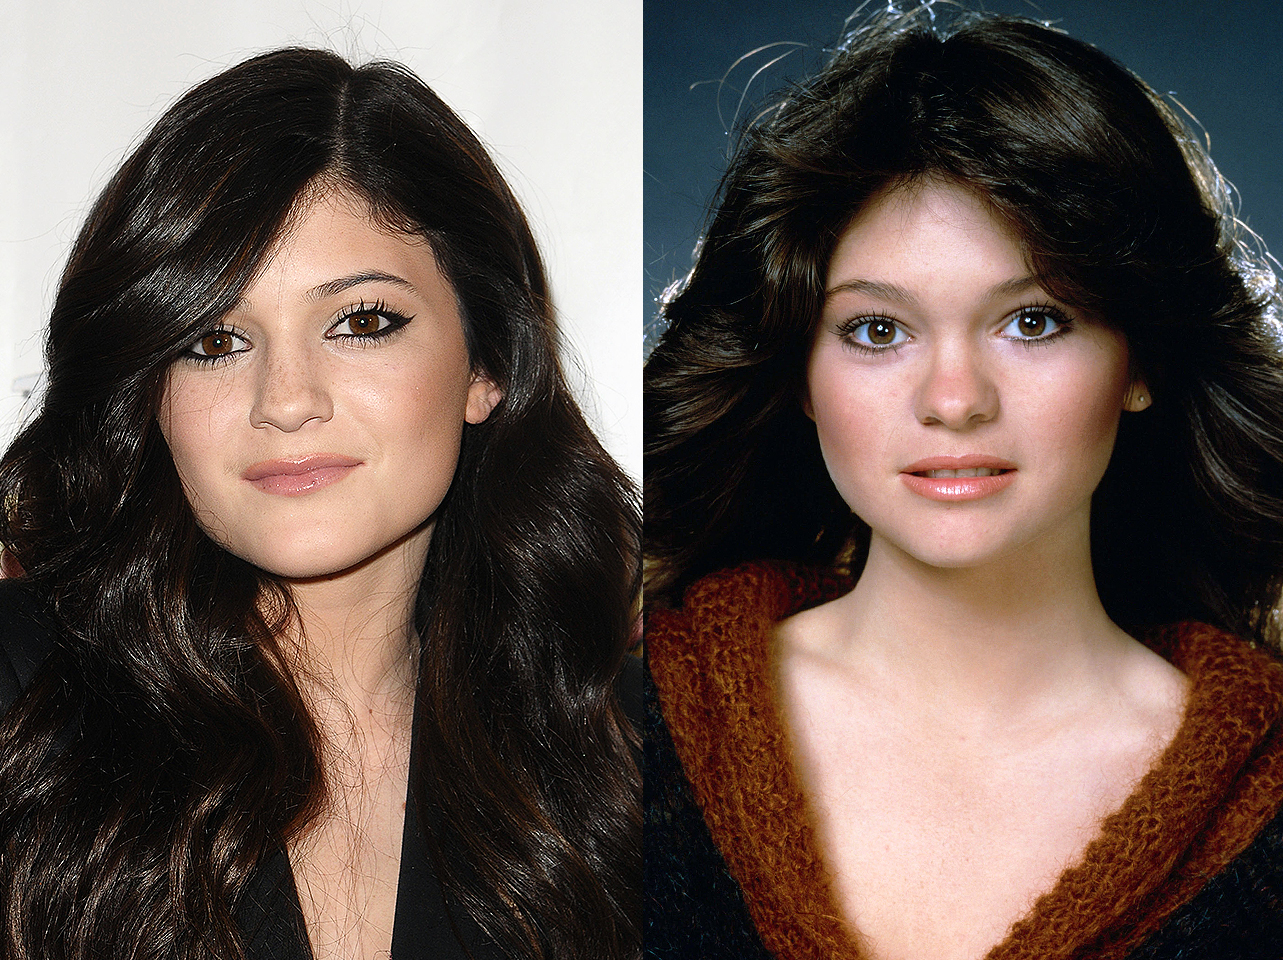 Kylie Jenner y Valerie Bertinelli | Foto: Getty Images